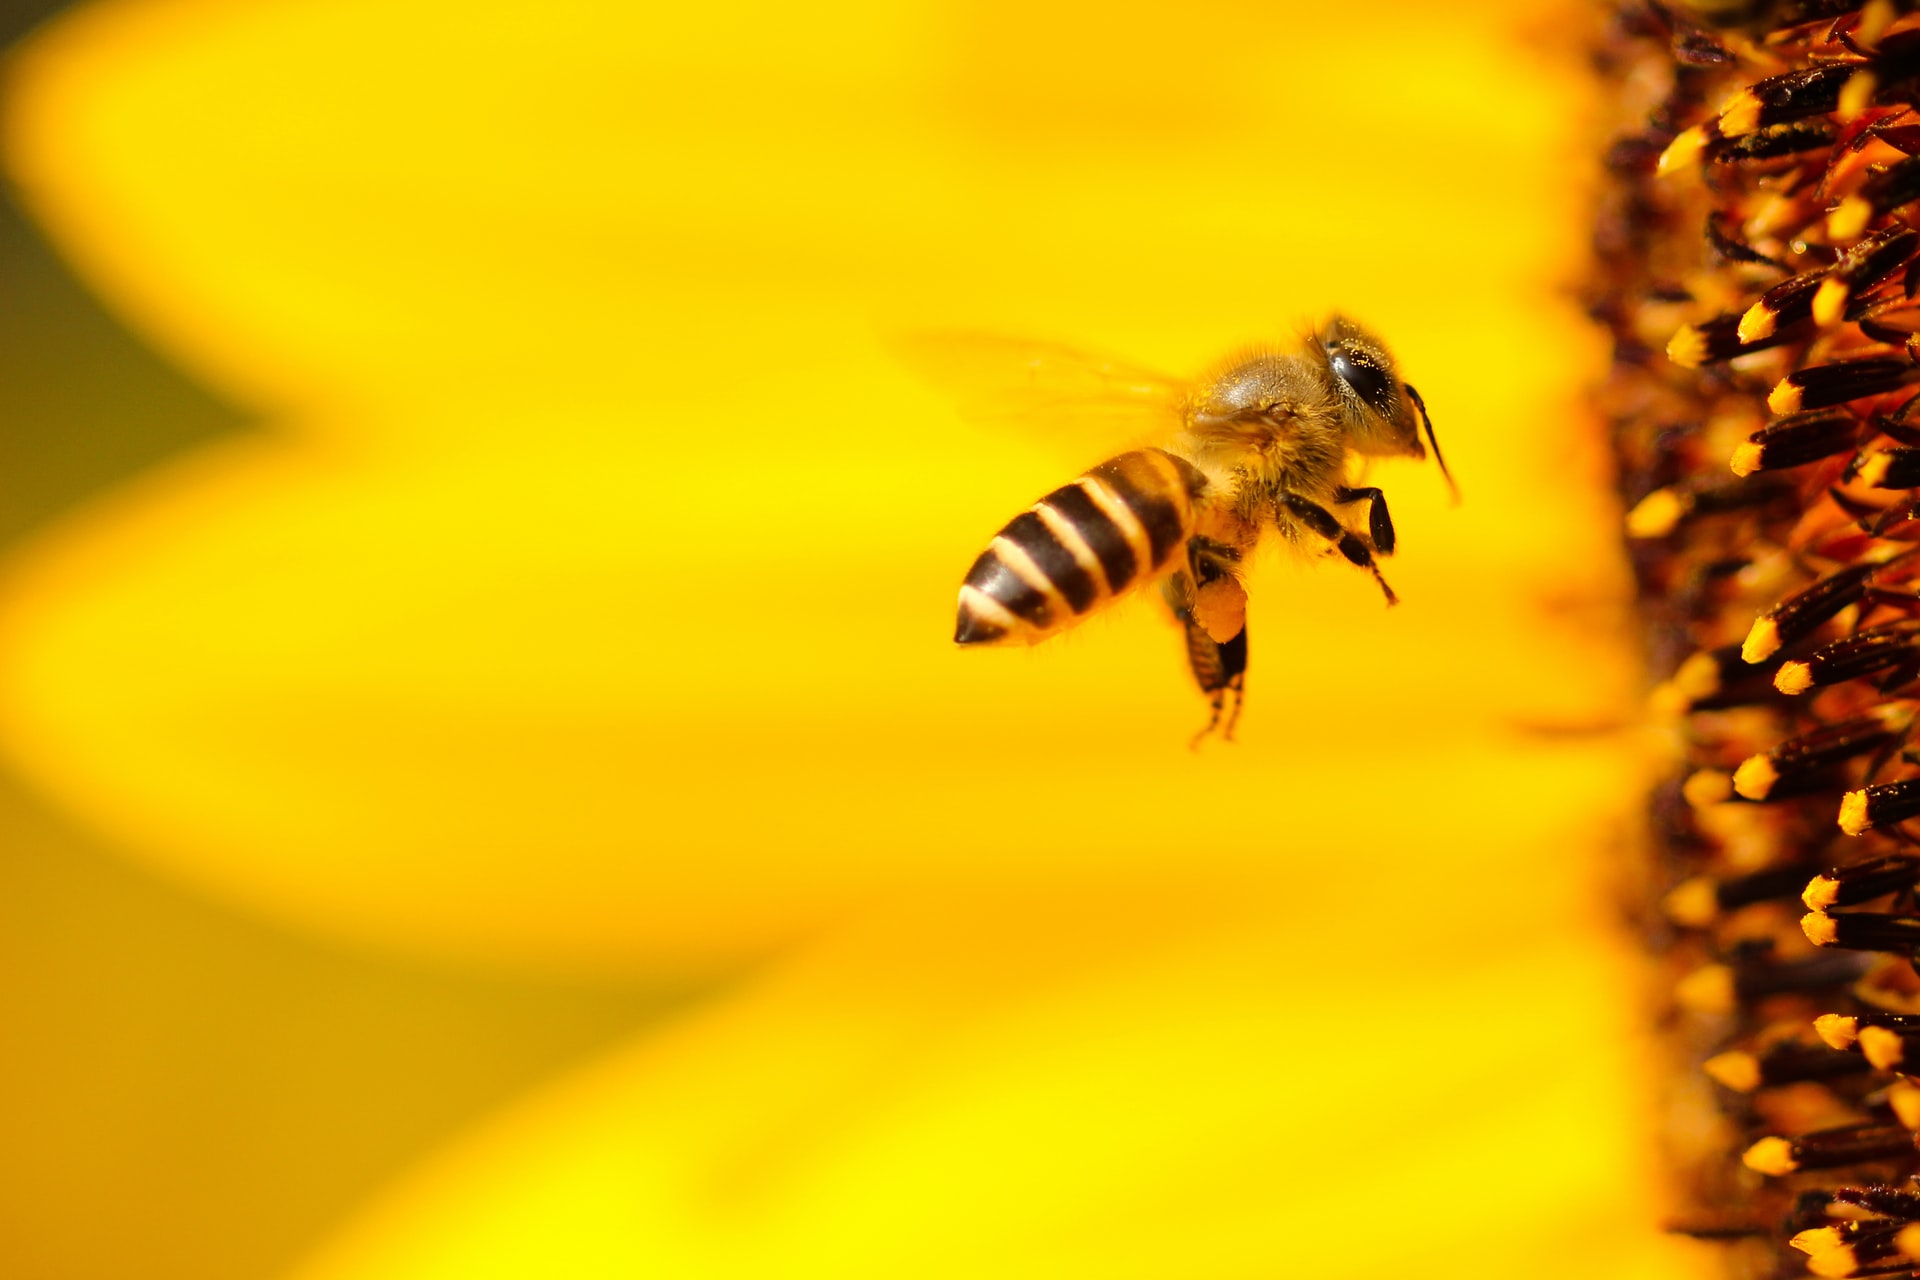 Why Do Bees Chase You When You Run?